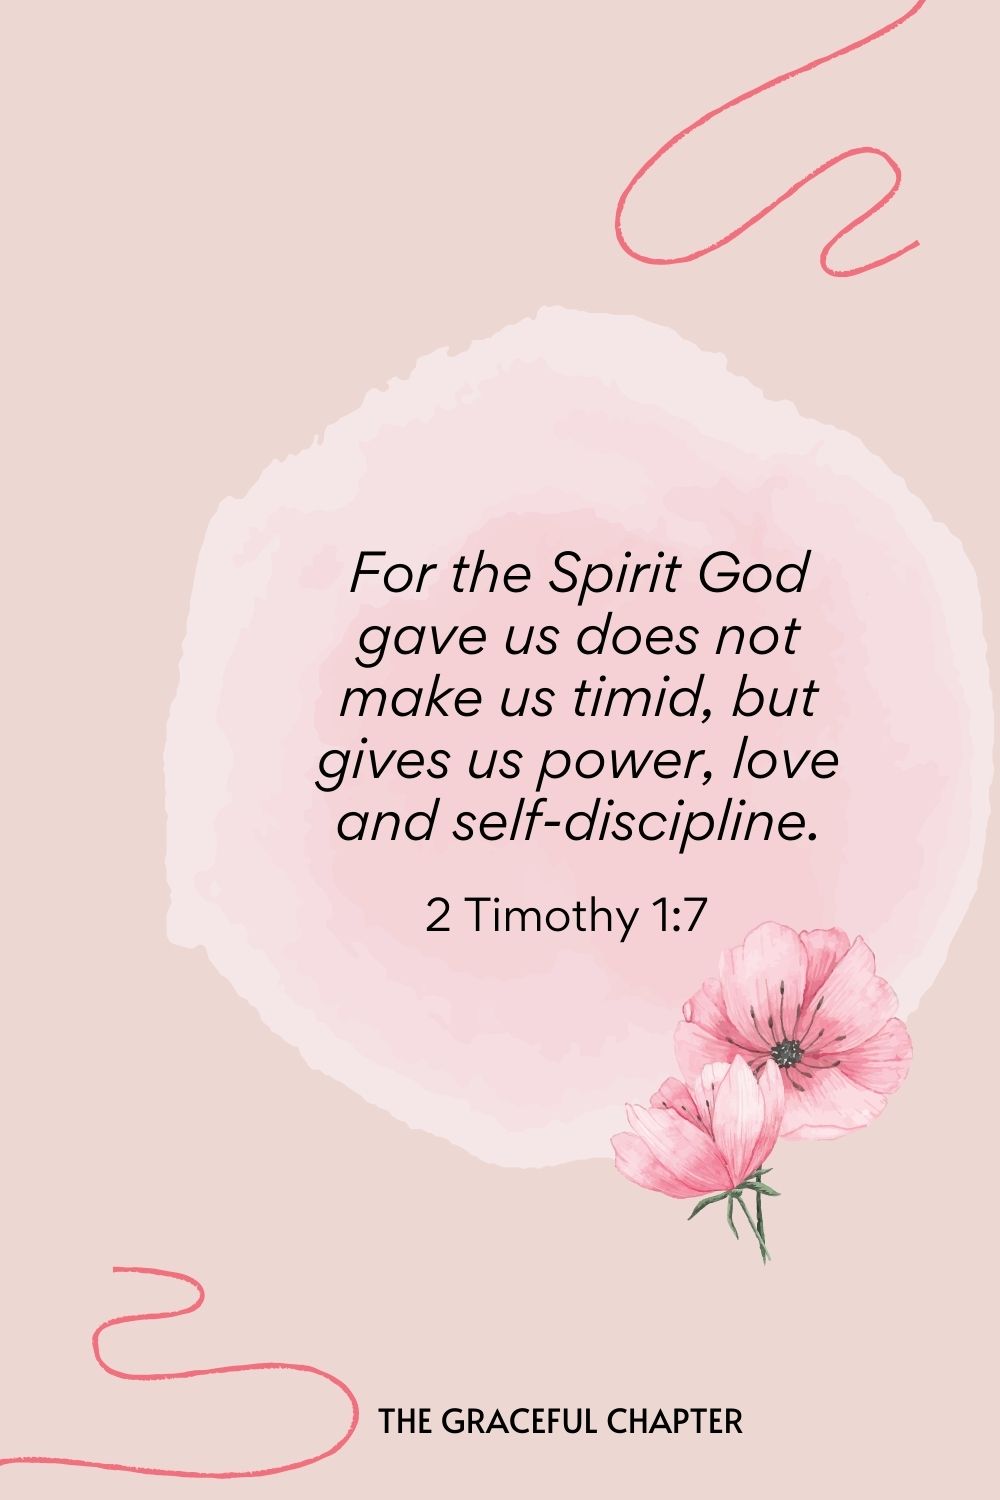 Bible verses to pray against bad dreams - For the Spirit God gave us does not make us timid, but gives us power, love and self-discipline.  2 Timothy 1:7